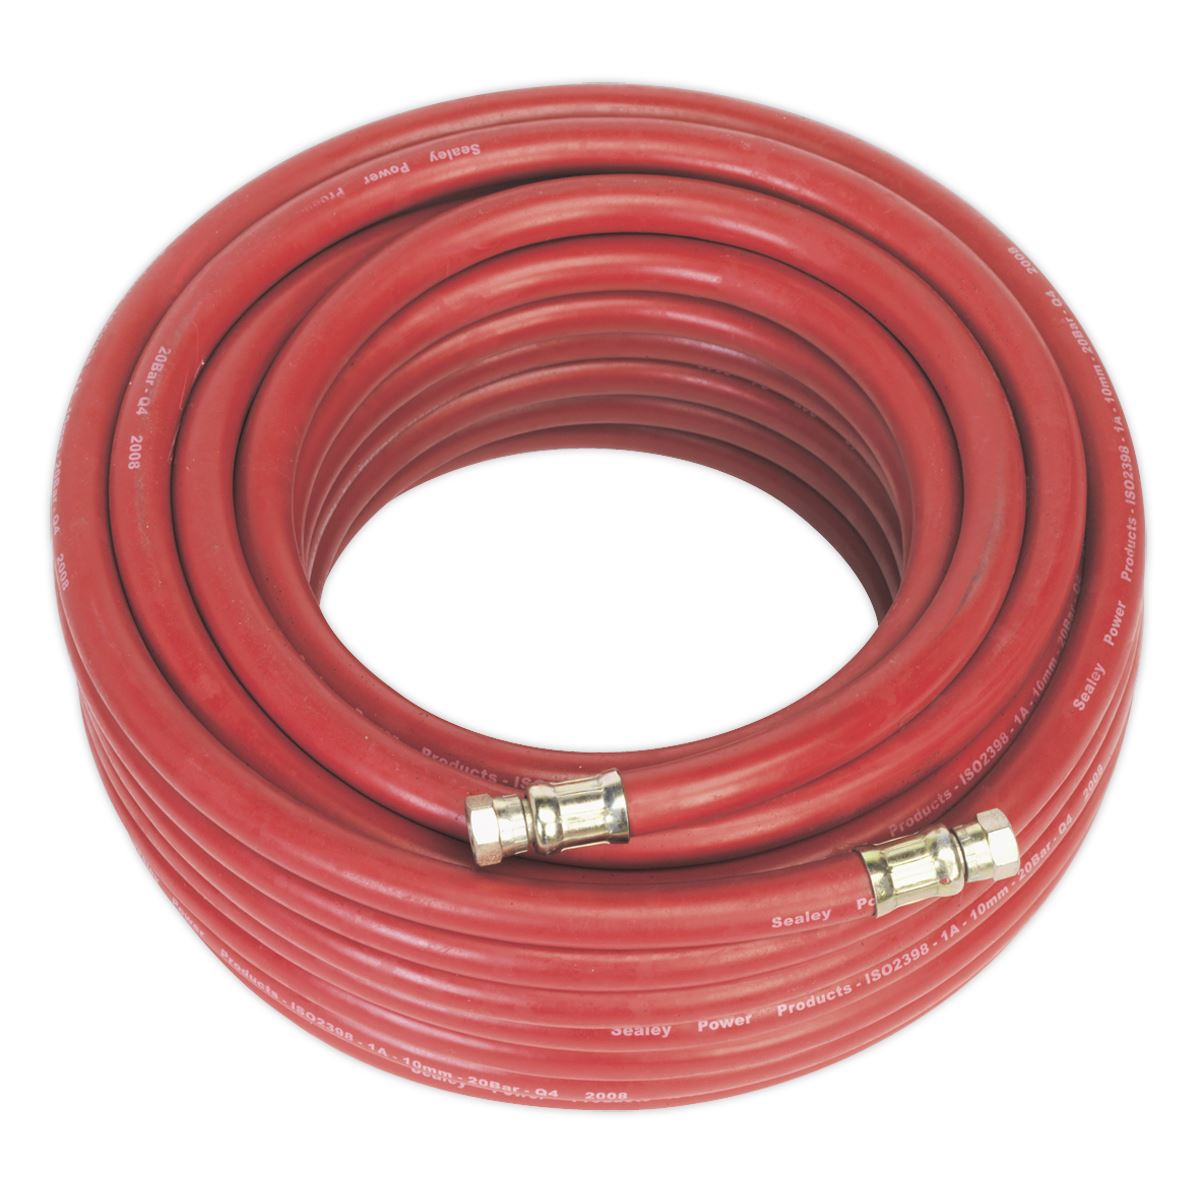 Sealey Air Hose 20m x Ø10mm with 1/4"BSP Unions